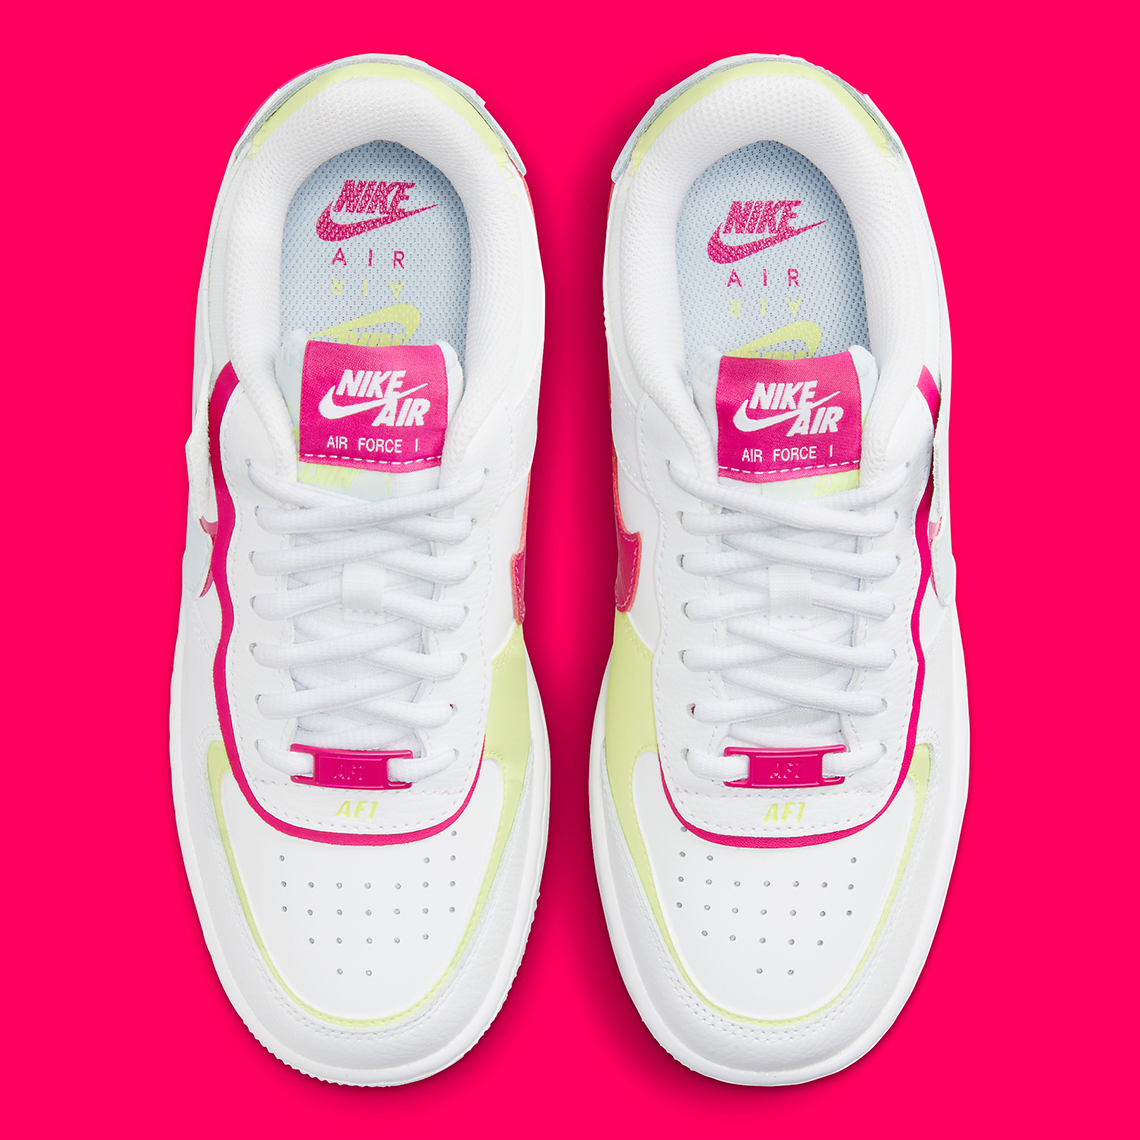 nike air force 1 low shadow white pink yellow fq8885 100 6